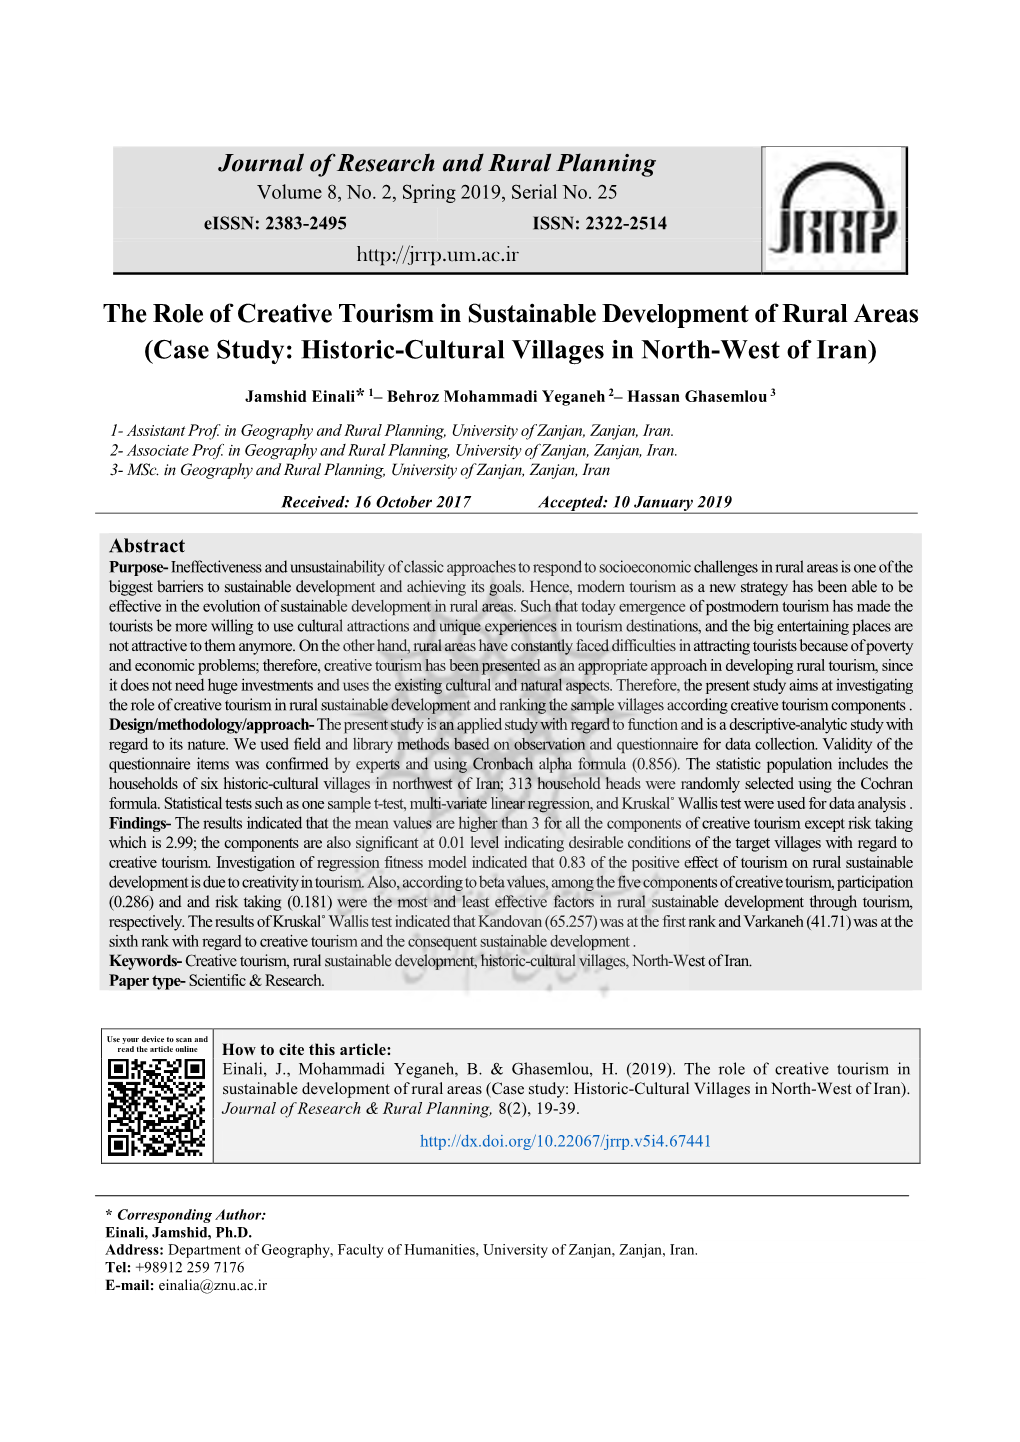 The Role of Creative Tourism in Sustainable Development of Rural Areas (Case Study: Historic-Cultural Villages in North-West of Iran)